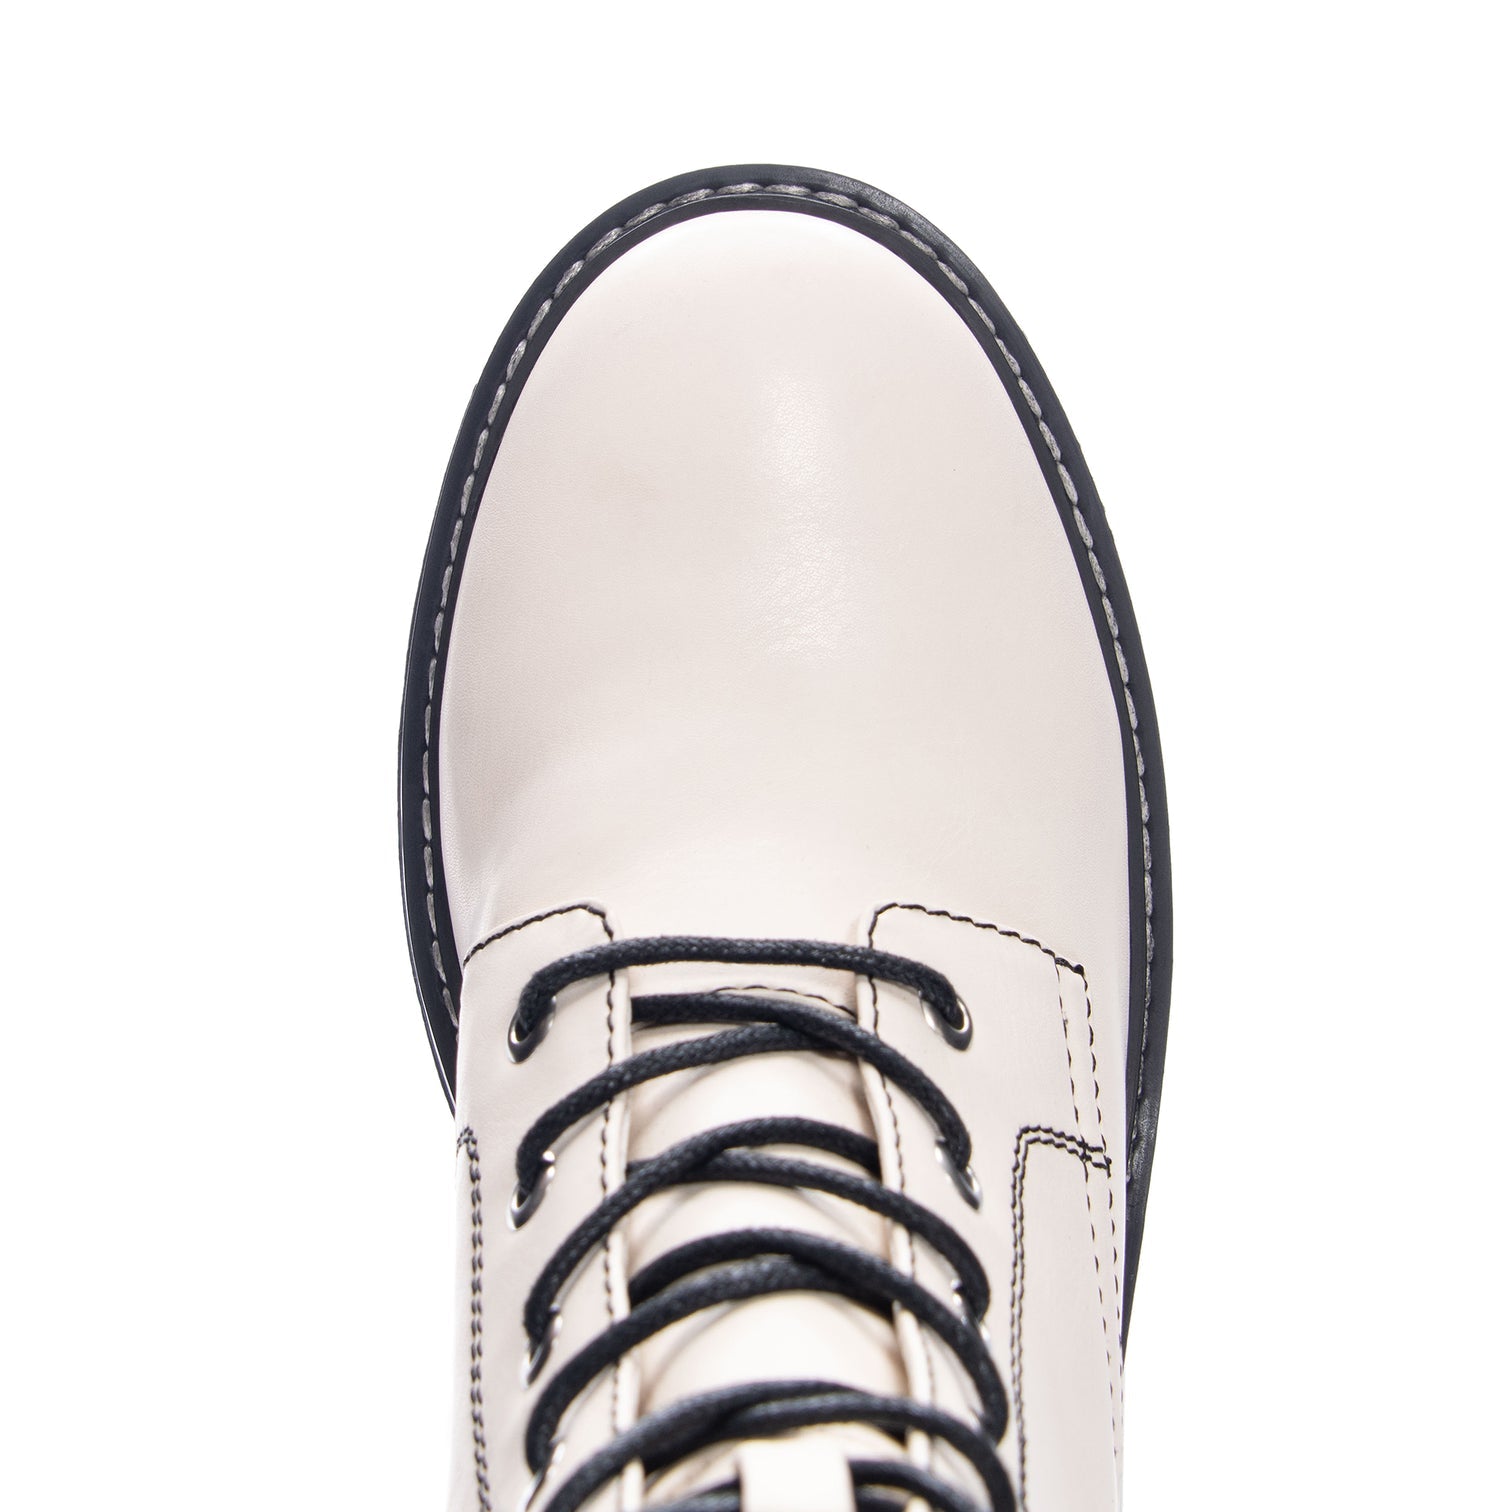 Top-down view of Chinese Laundry Harker Bootie toe: A white, vegan leather lace-up heeled bootie.